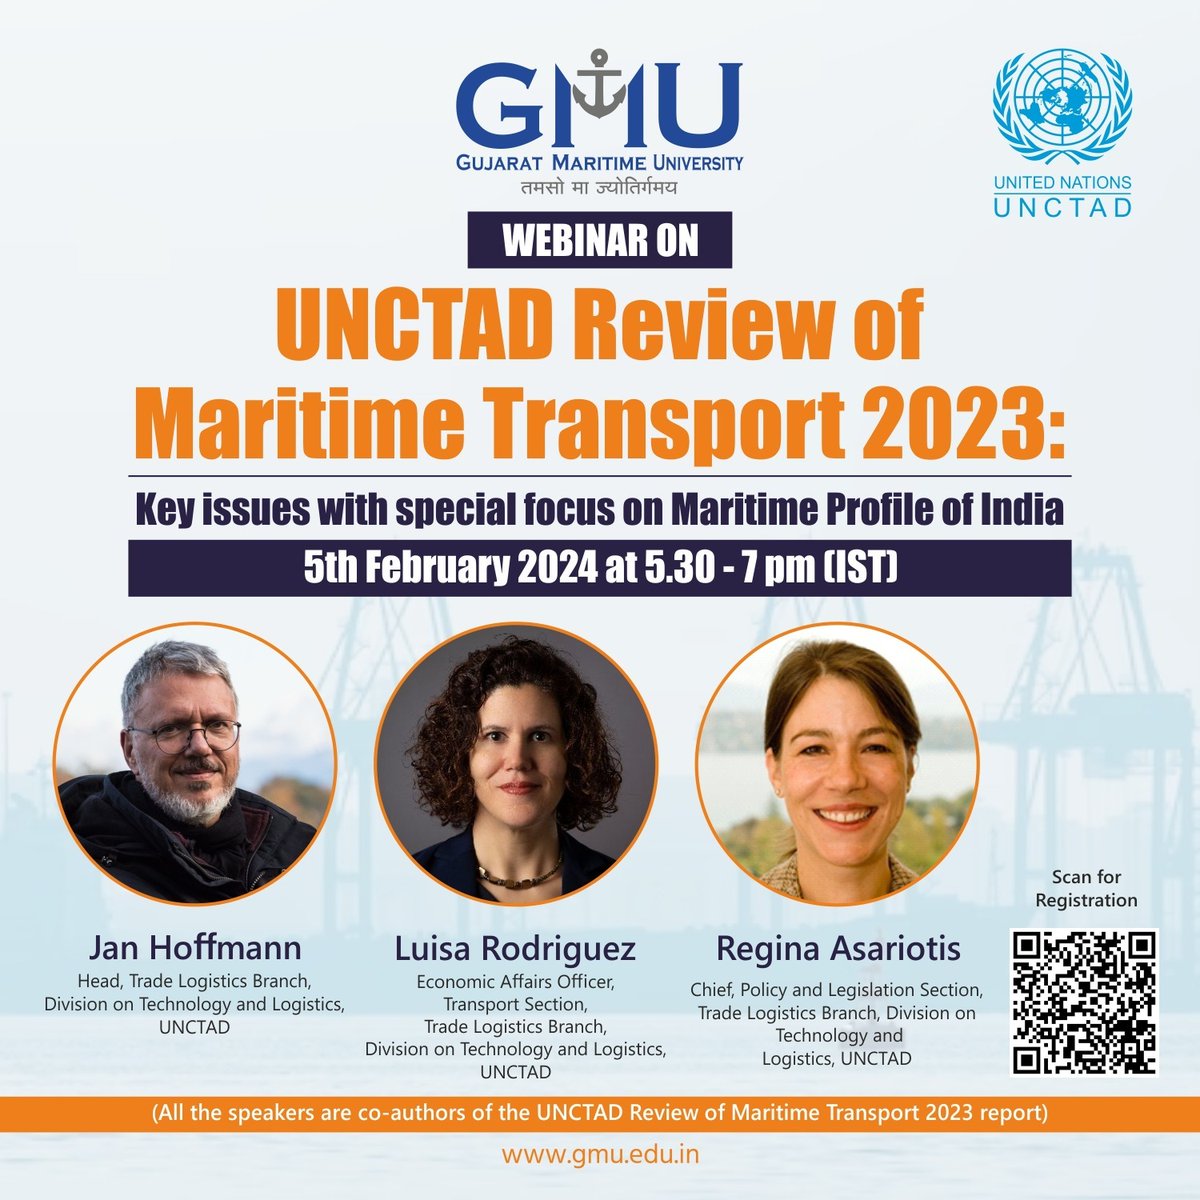 Gujarat Maritime University is pleased to organize a Webinar on 'UNCTAD Review of Maritime Transport 2023: Key issues with special focus on Maritime Profile of India' on 5th February’24 at 5.30 PM (IST). Register Now!! #GMU #Maritime #Transport #Webinars